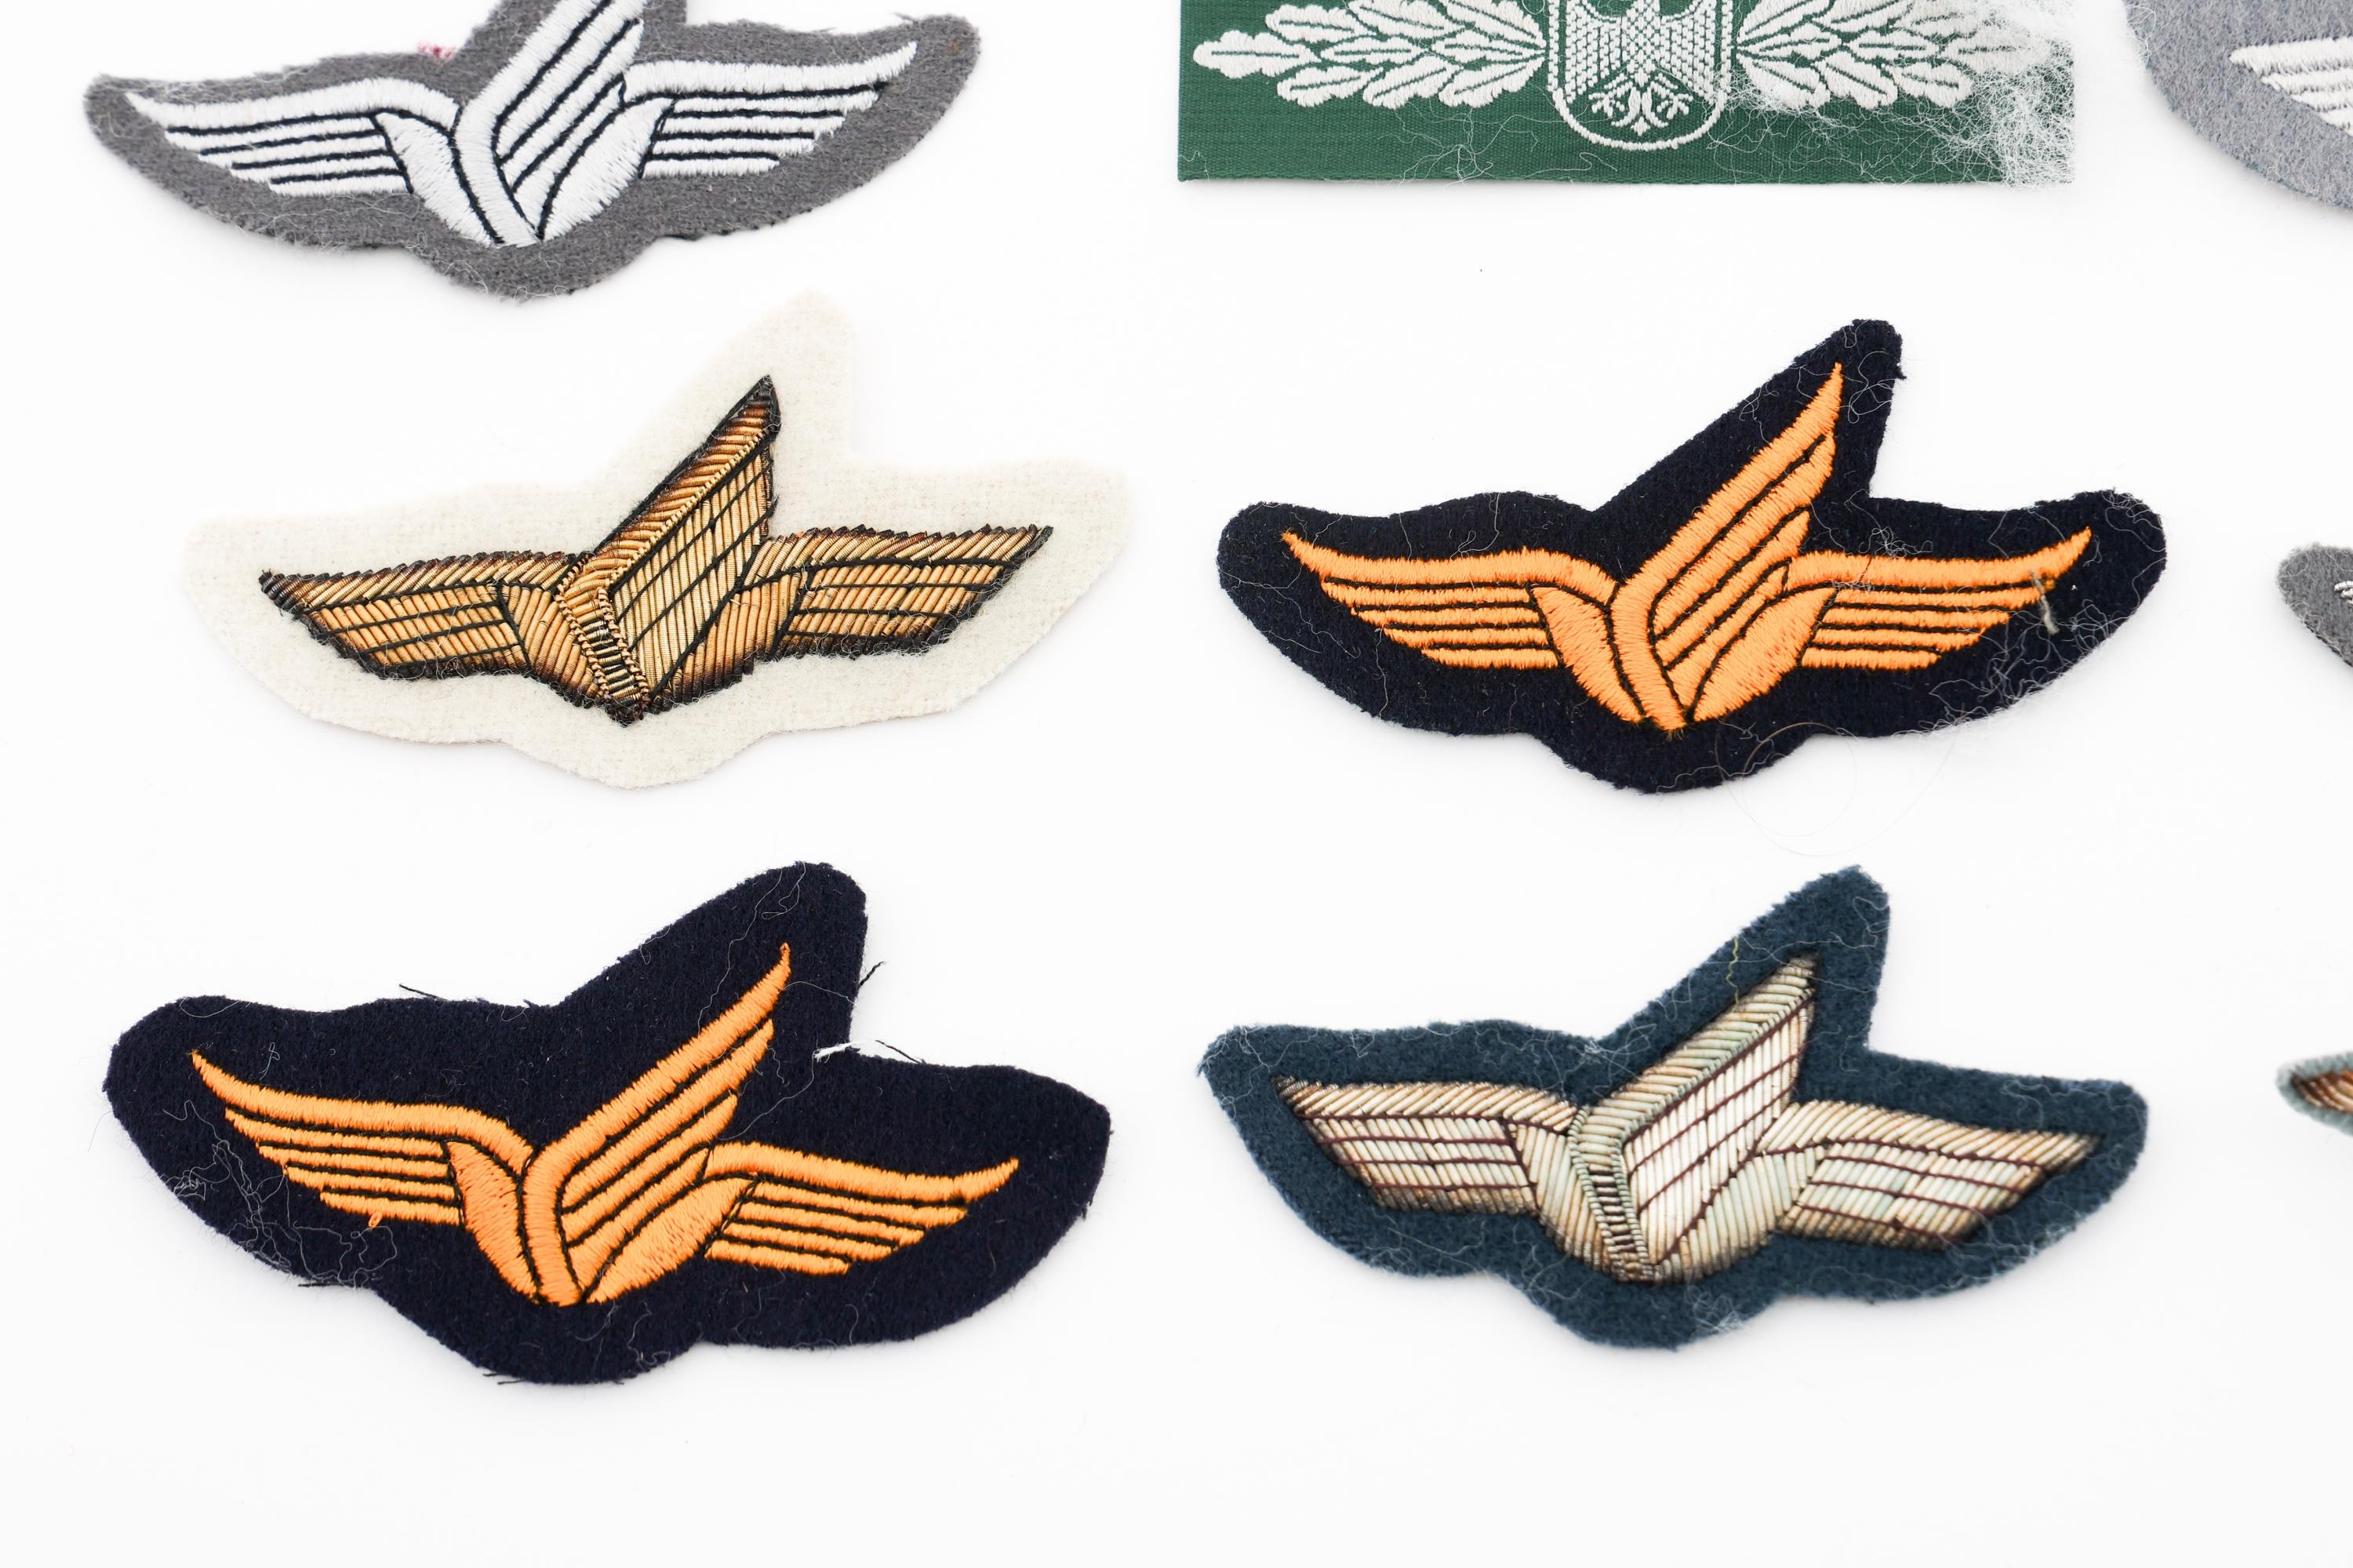 COLD WAR - CURRENT GERMAN JUMP WINGS & PATCHES